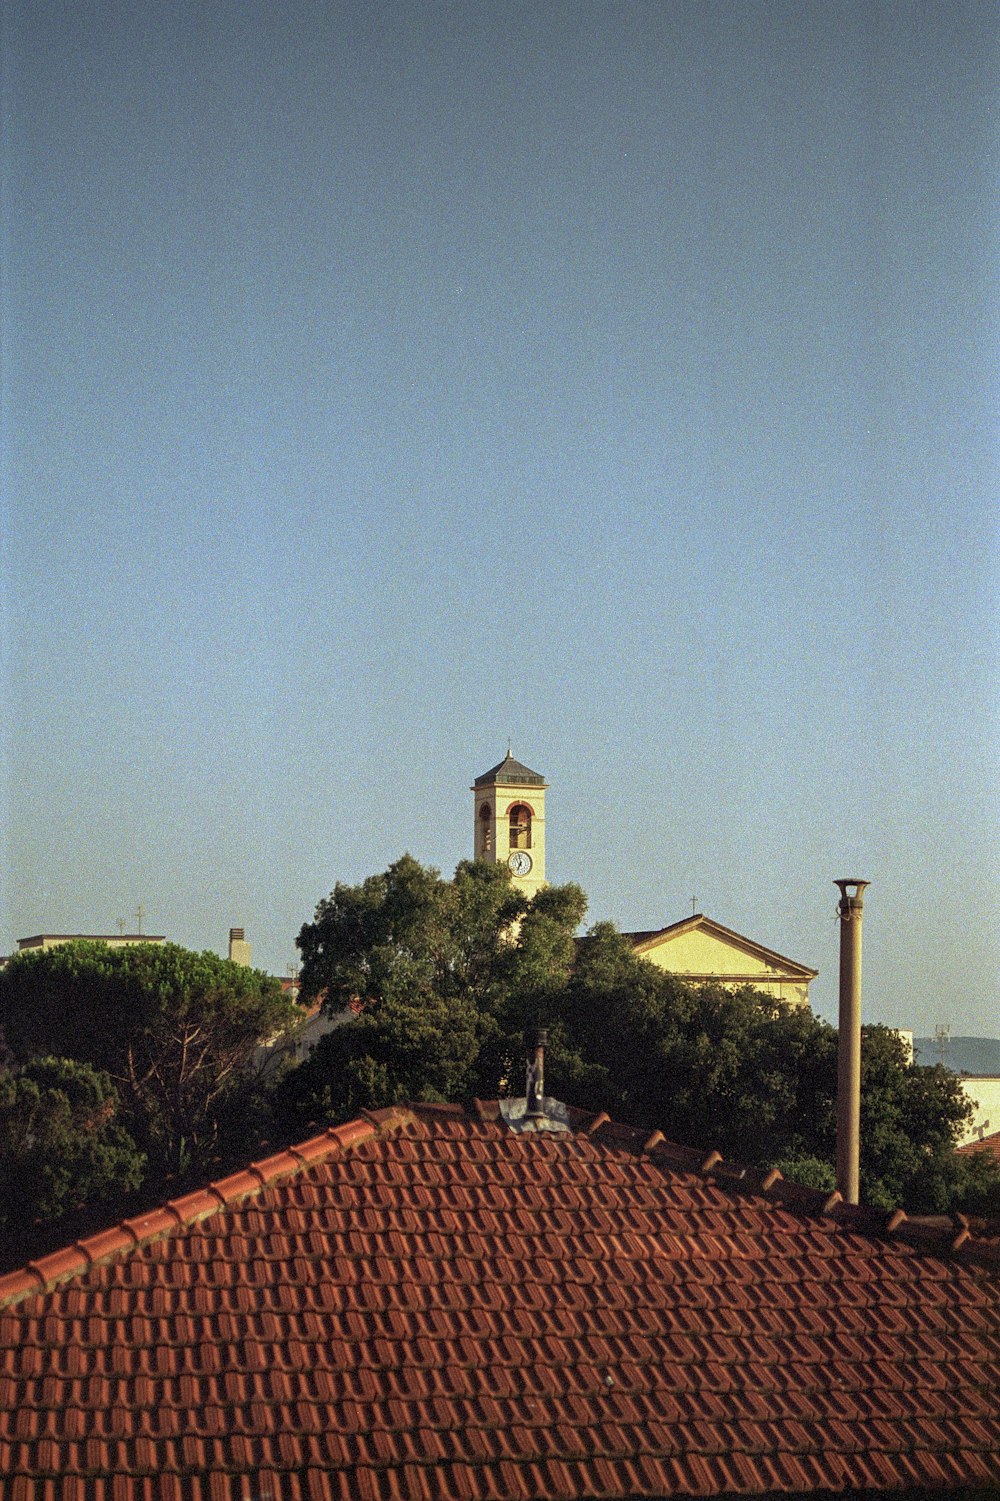 a view of a building with a clock tower in the background